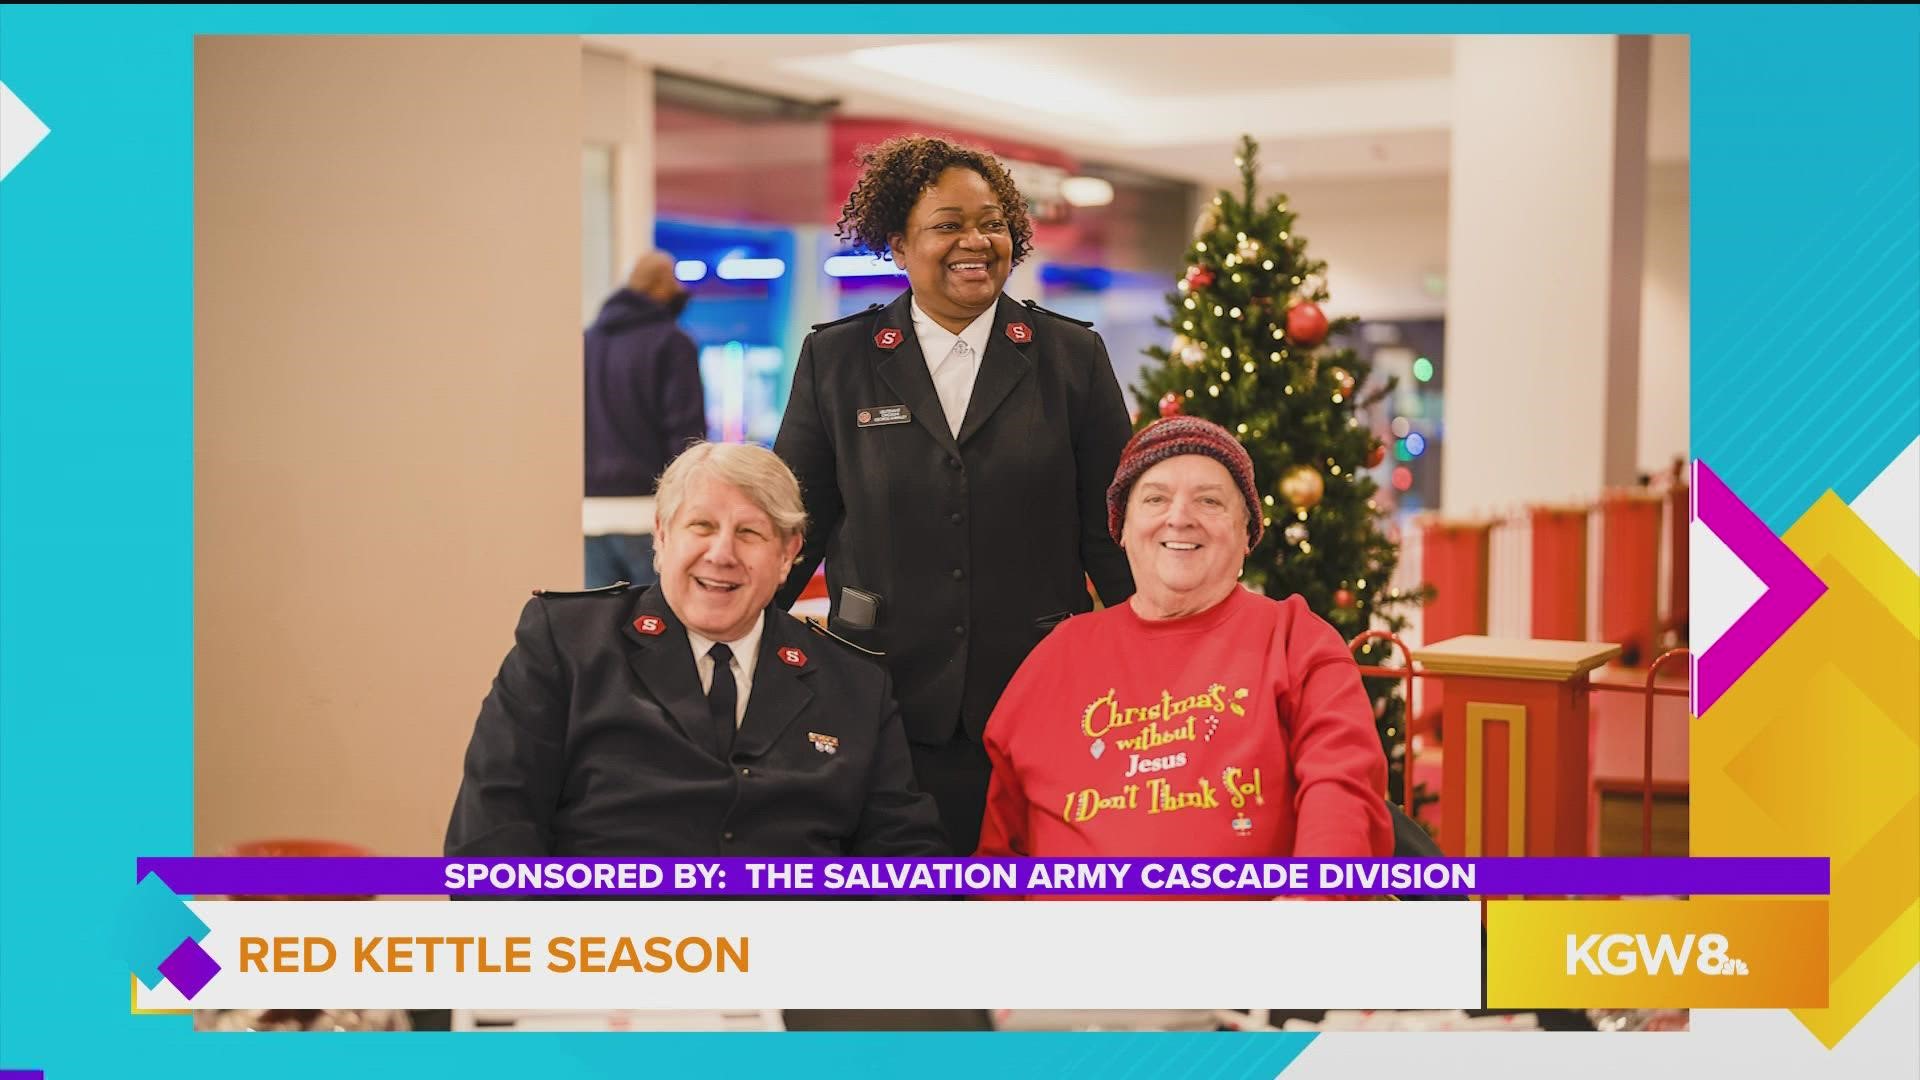 This segment is sponsored by The Salvation Army Cascade Division